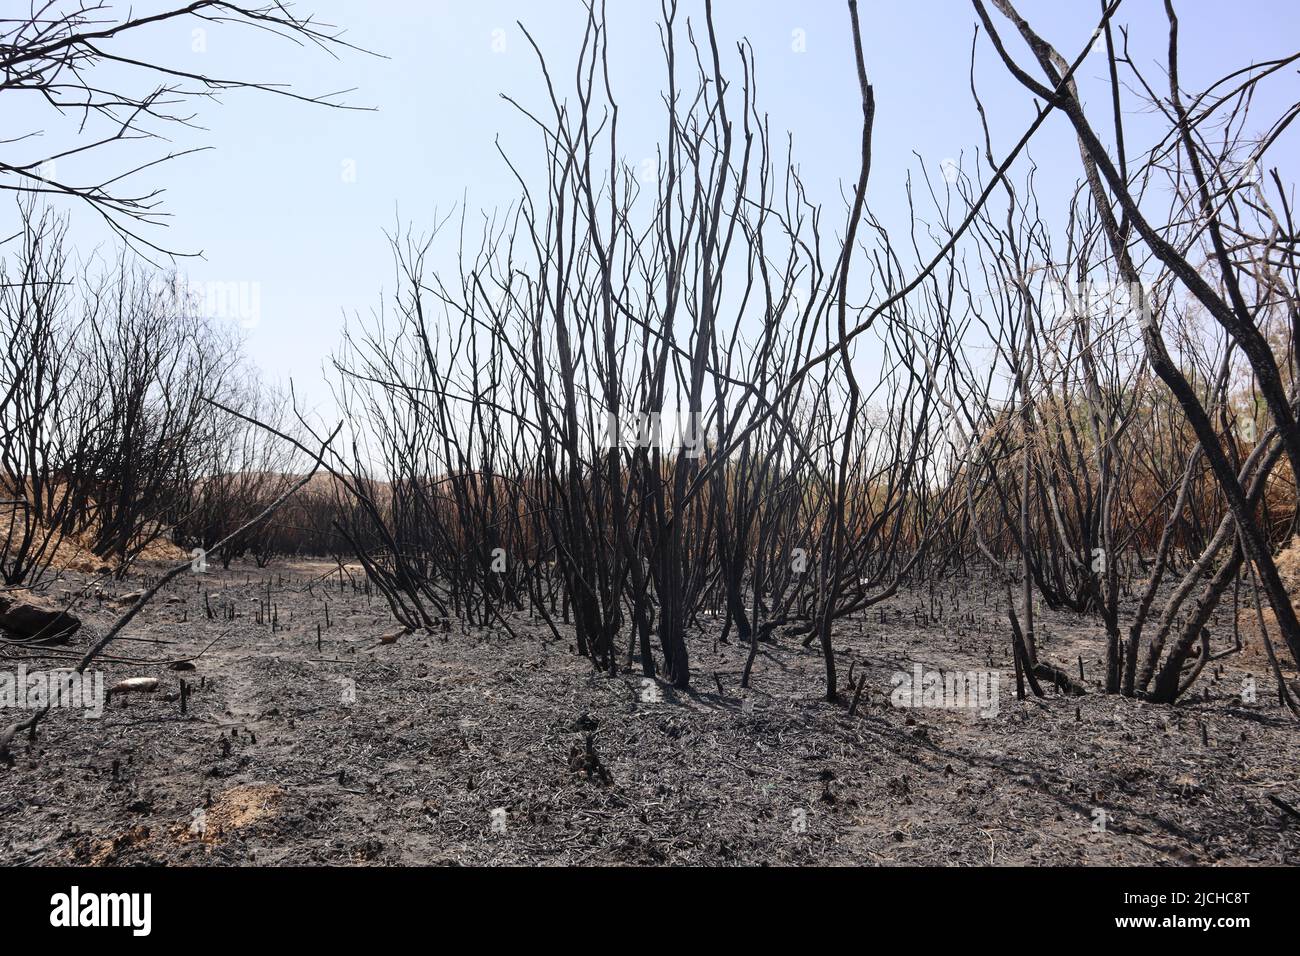 A black and sad sight of vegetation and scorched earth following a fire Stock Photo